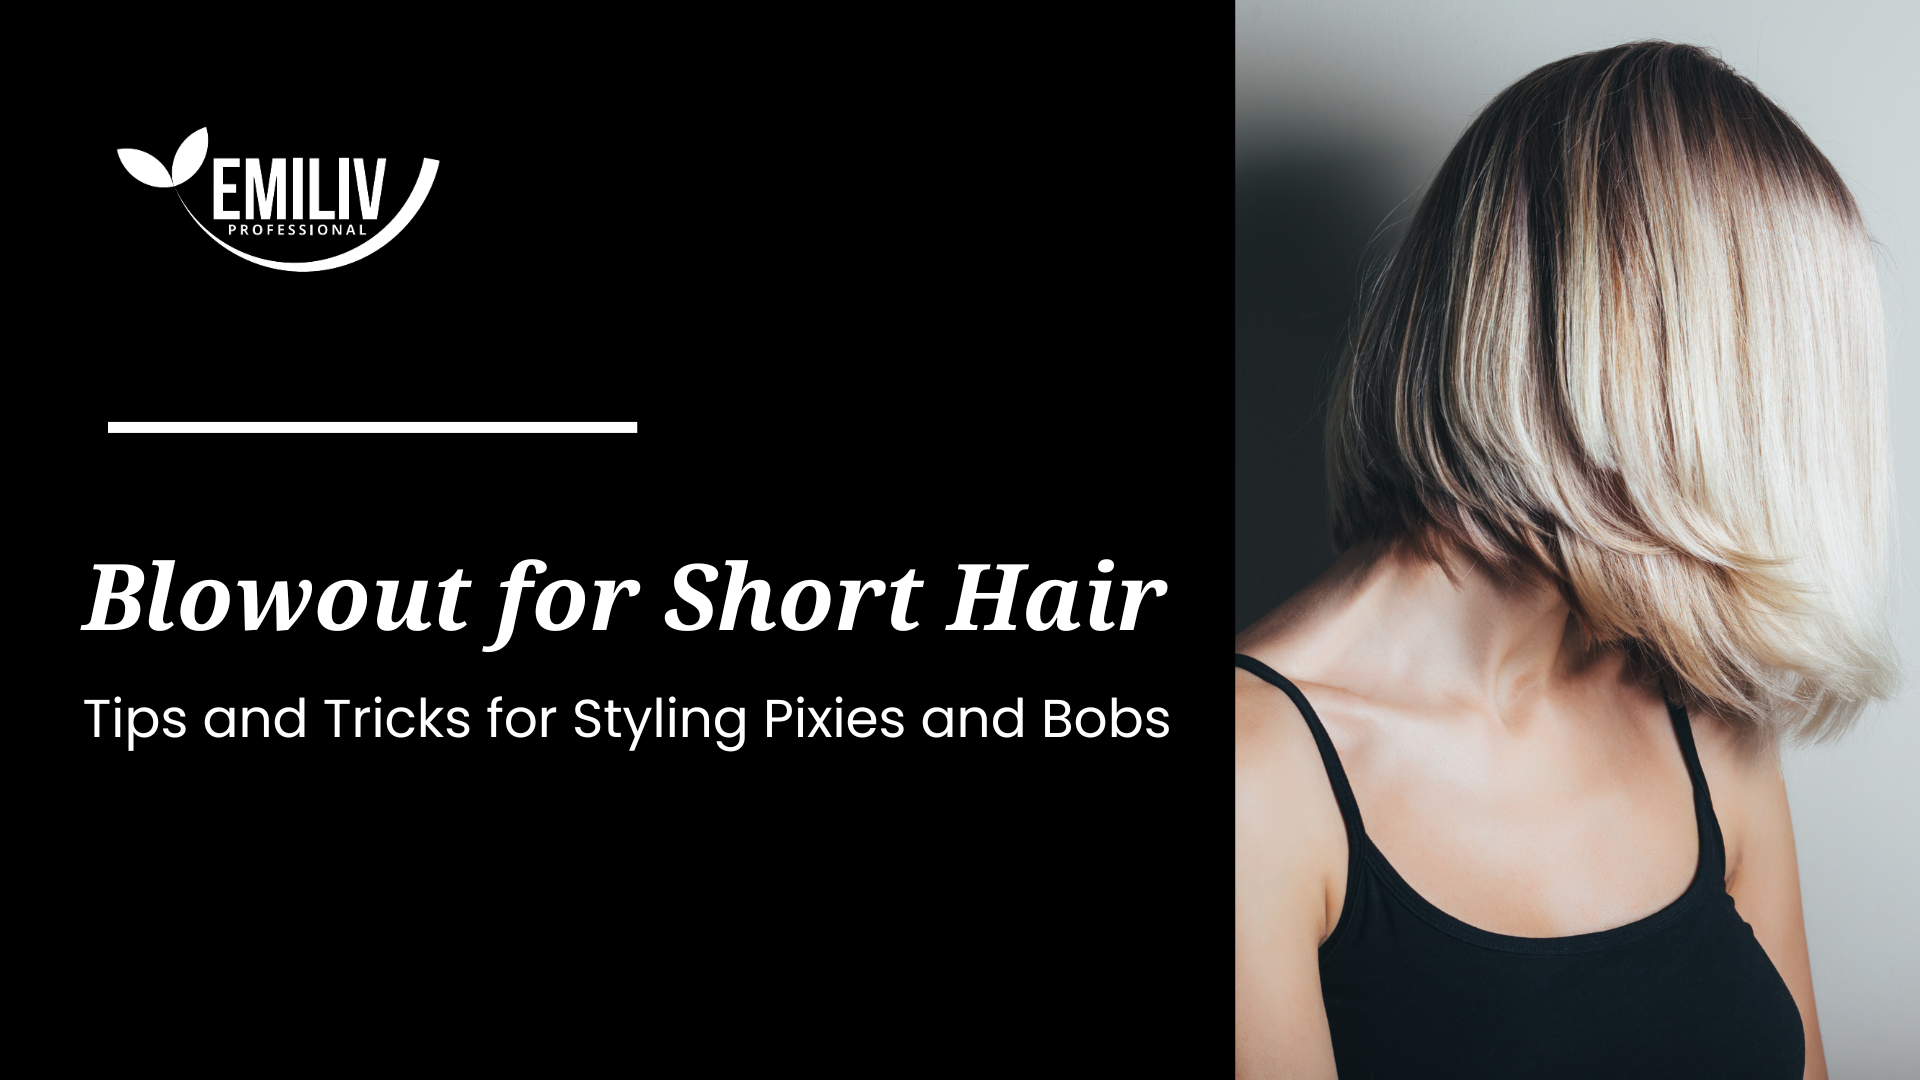 Blowout for Short Hair: Tips and Tricks for Styling Pixies and Bobs